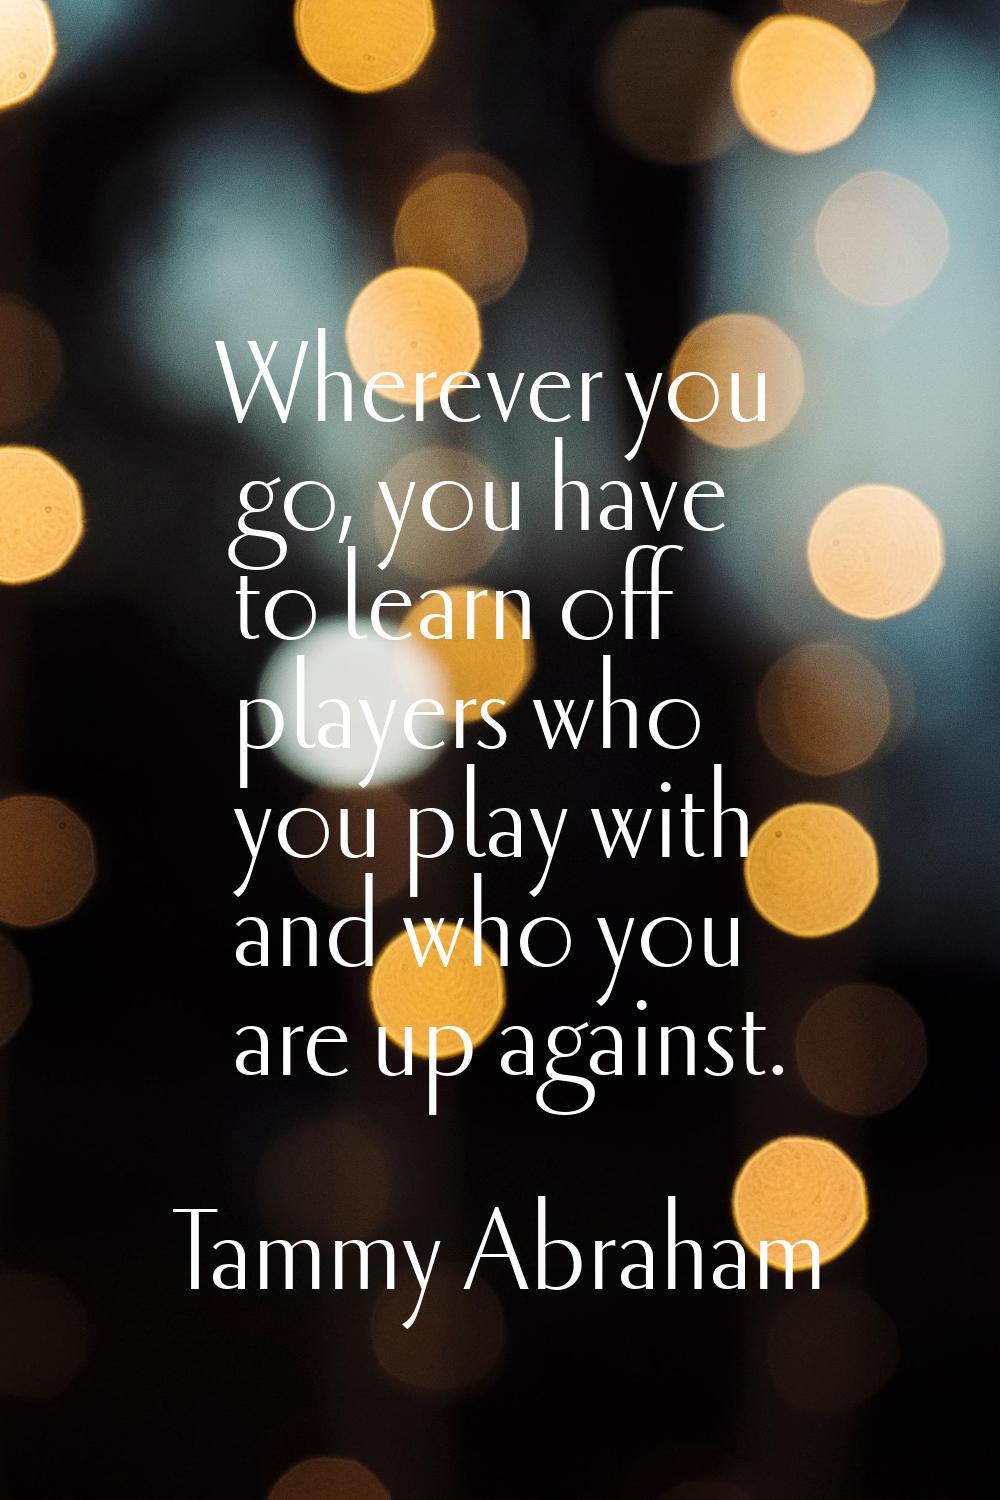 Wherever you go, you have to learn off players who you play with and who you are up against.